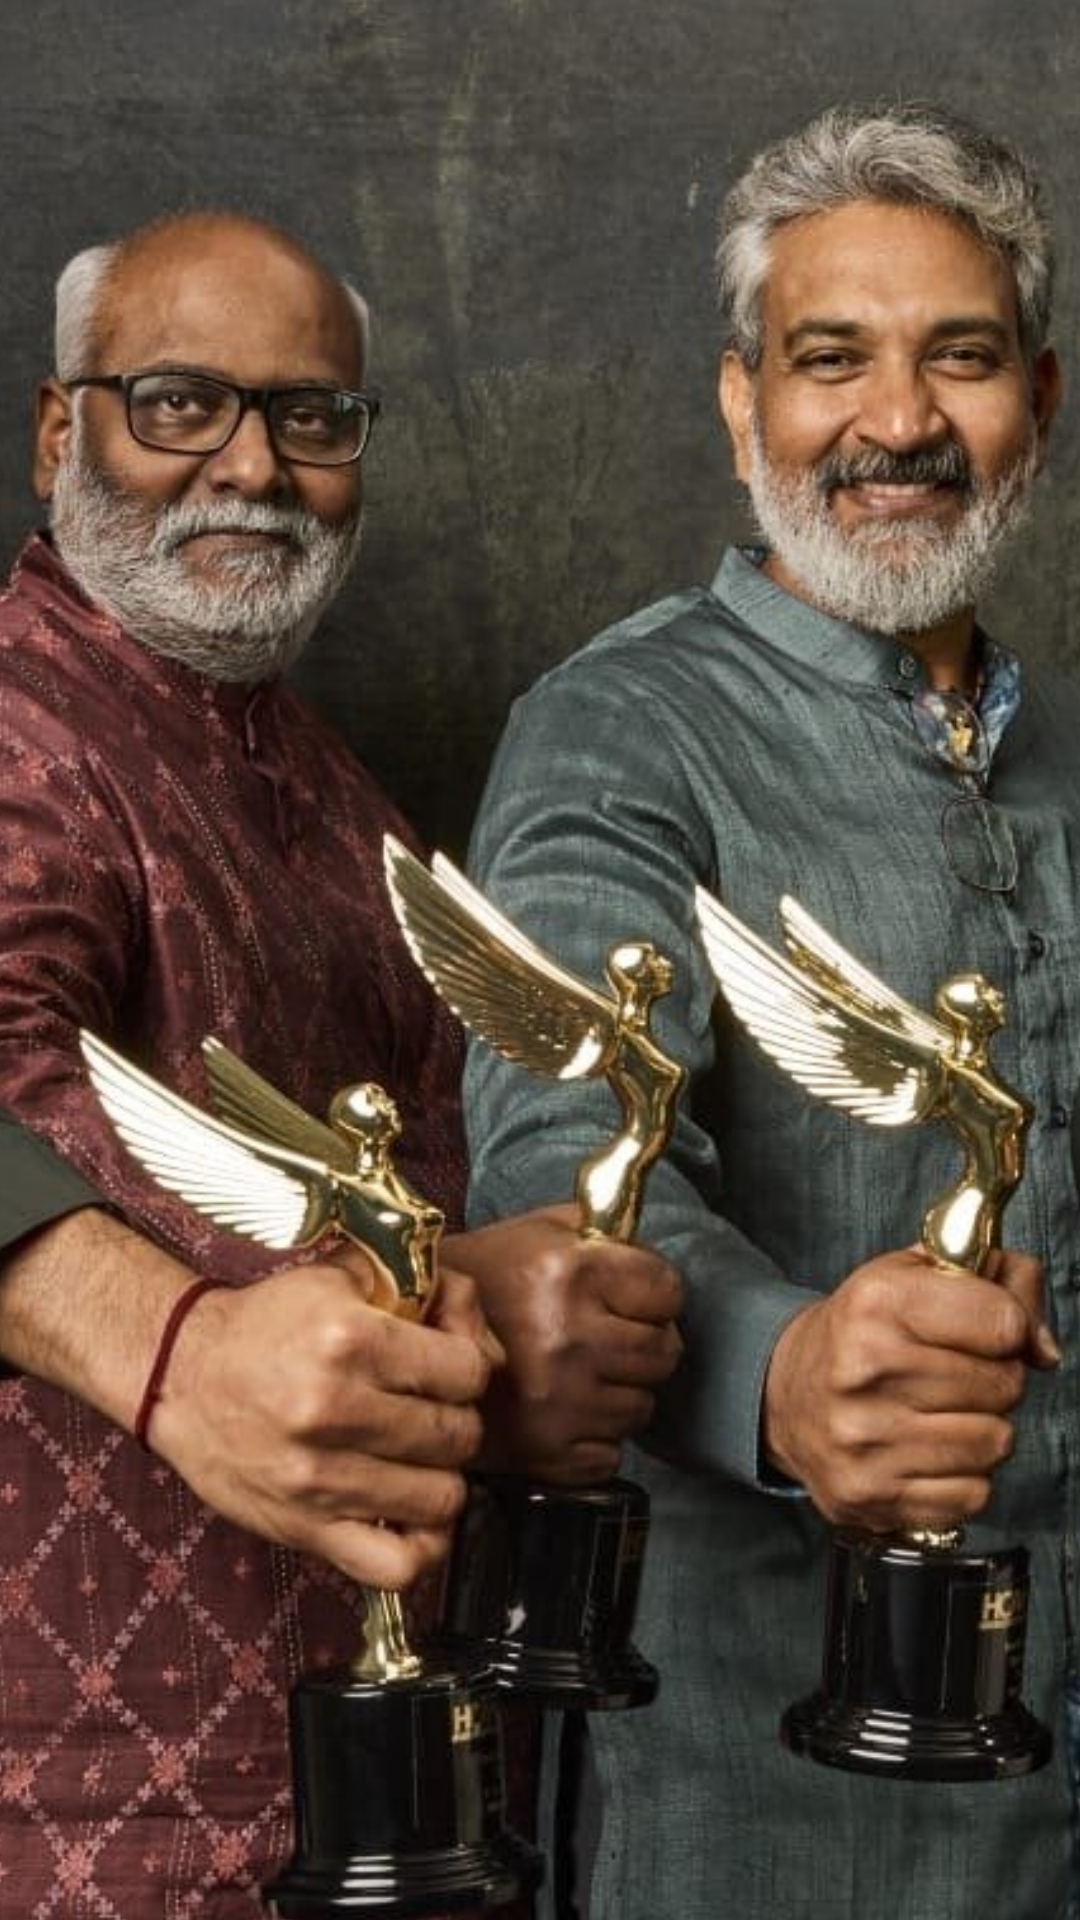 Ahead of Oscars 2023, let's have a look at all the prestigious awards won by SS Rajamouli's RRR